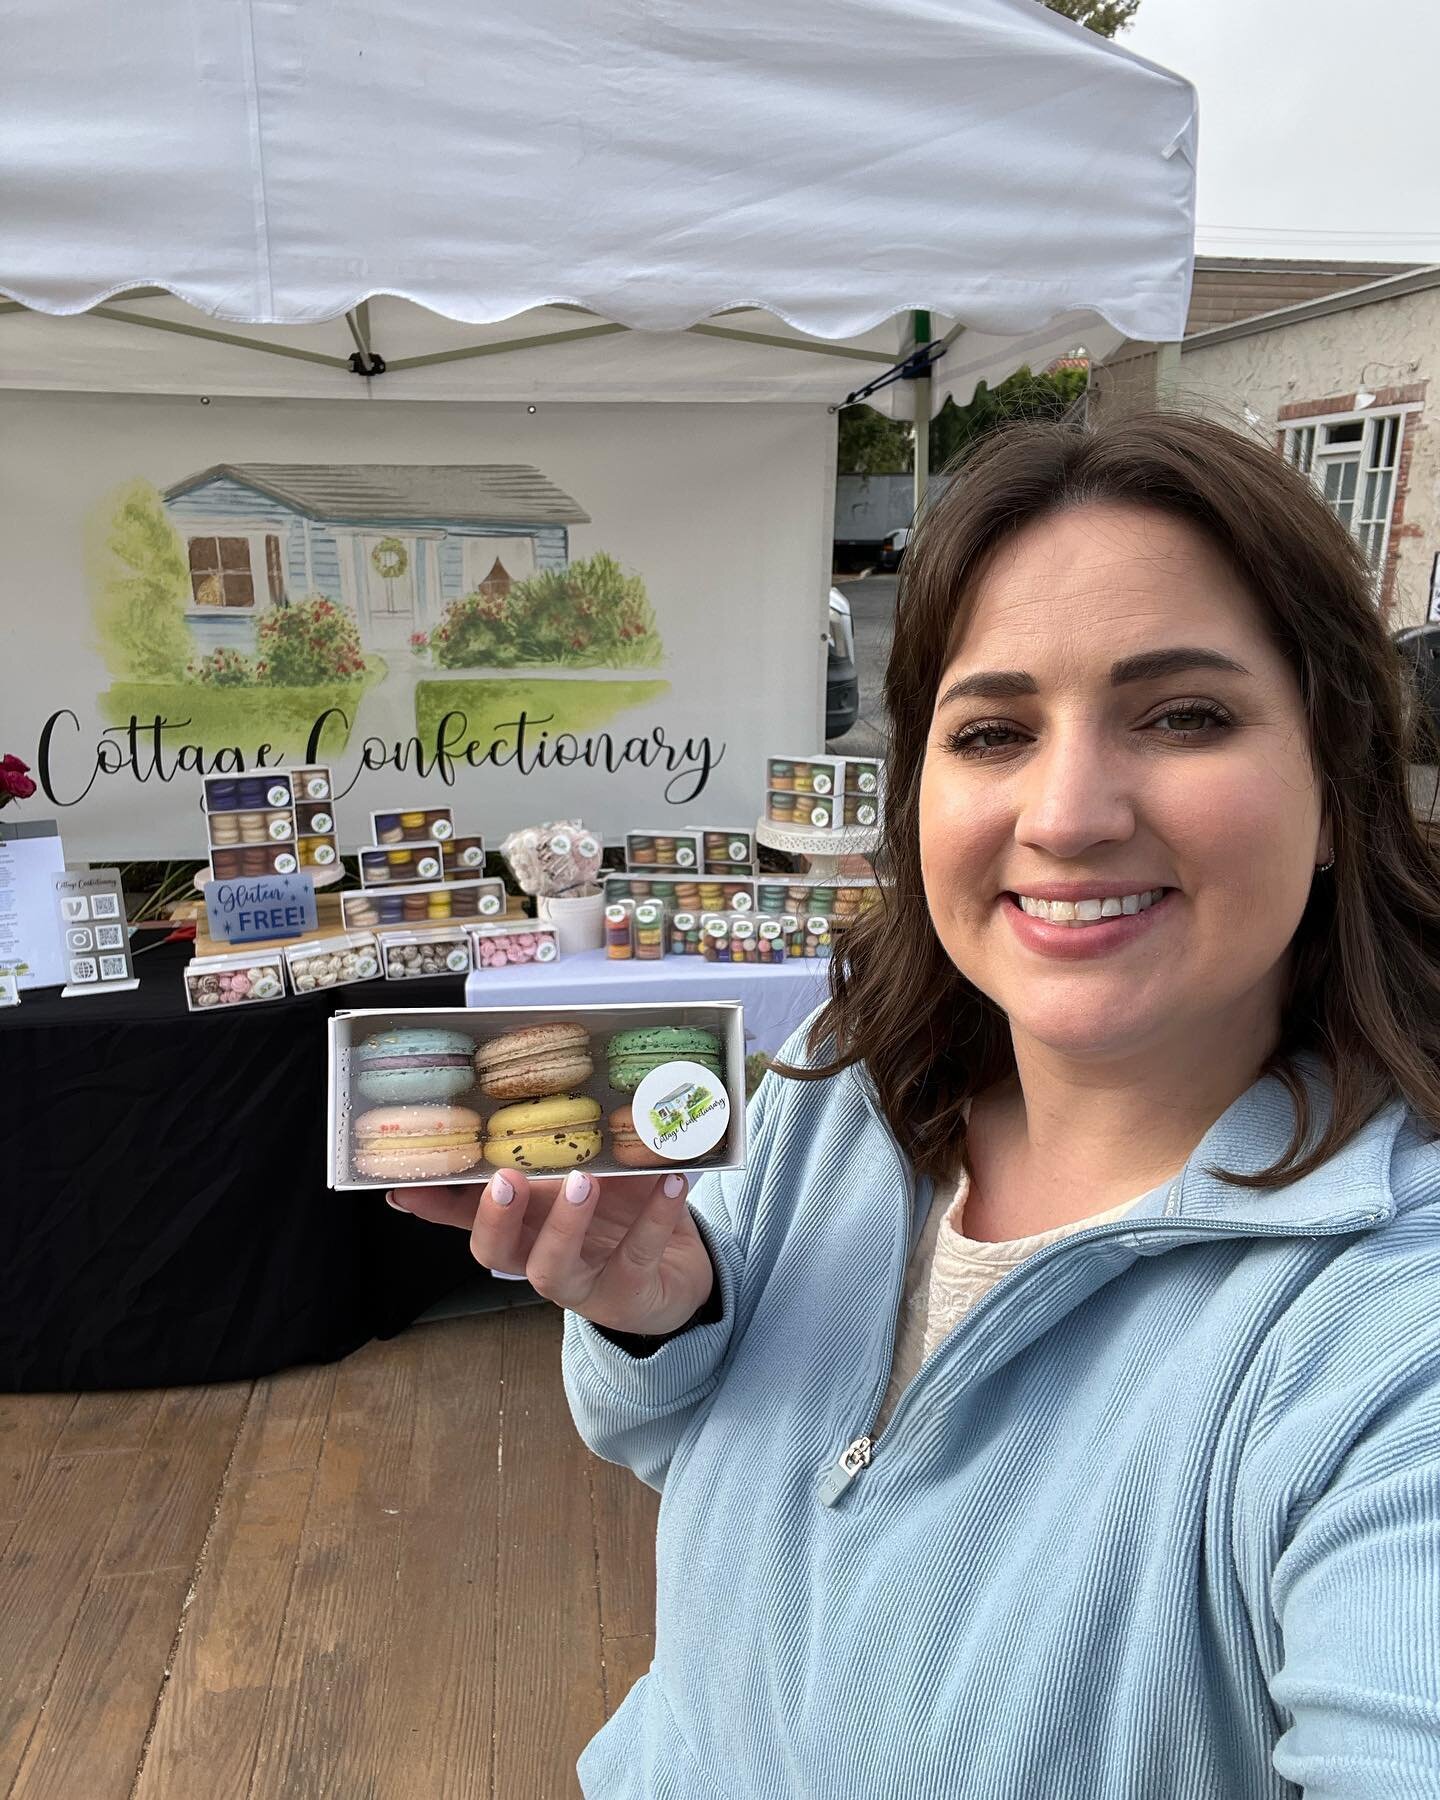 Hi friends! It&rsquo;s a beautiful cool morning to start the day! I&rsquo;ll be here, at the Calabasas Farmers Market today from 8 am - 1 pm!

It&rsquo;s the perfect day to get your Let&rsquo;s Do Brunch Pack! 

Hope to see you here! 
.
.
.
.
.
#cala